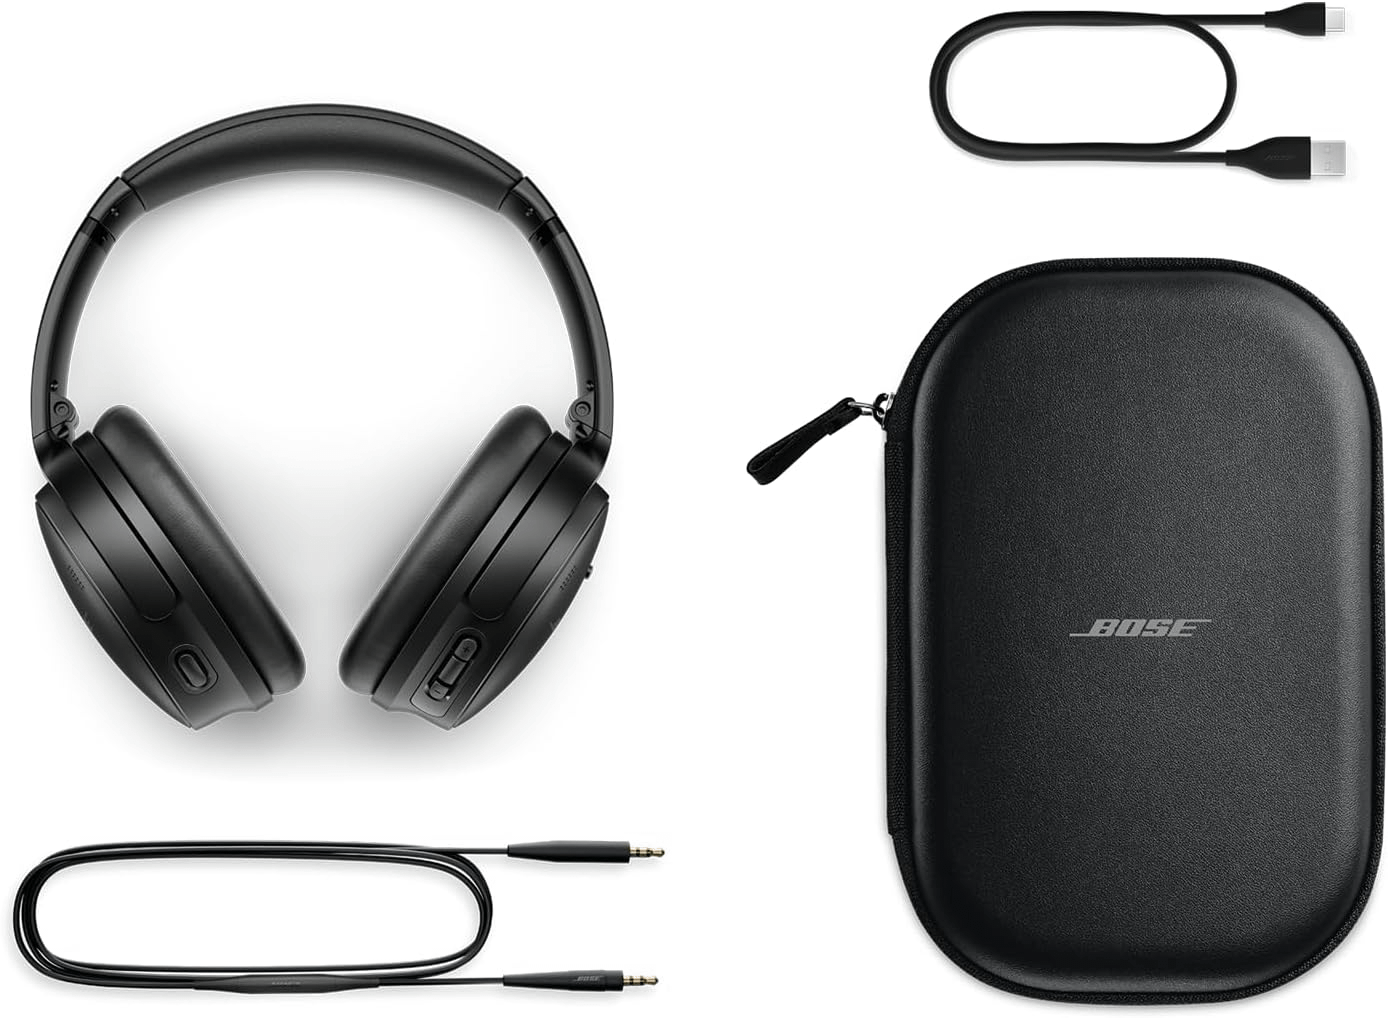 Bose headphones with a chord, USB C cable and hard case.